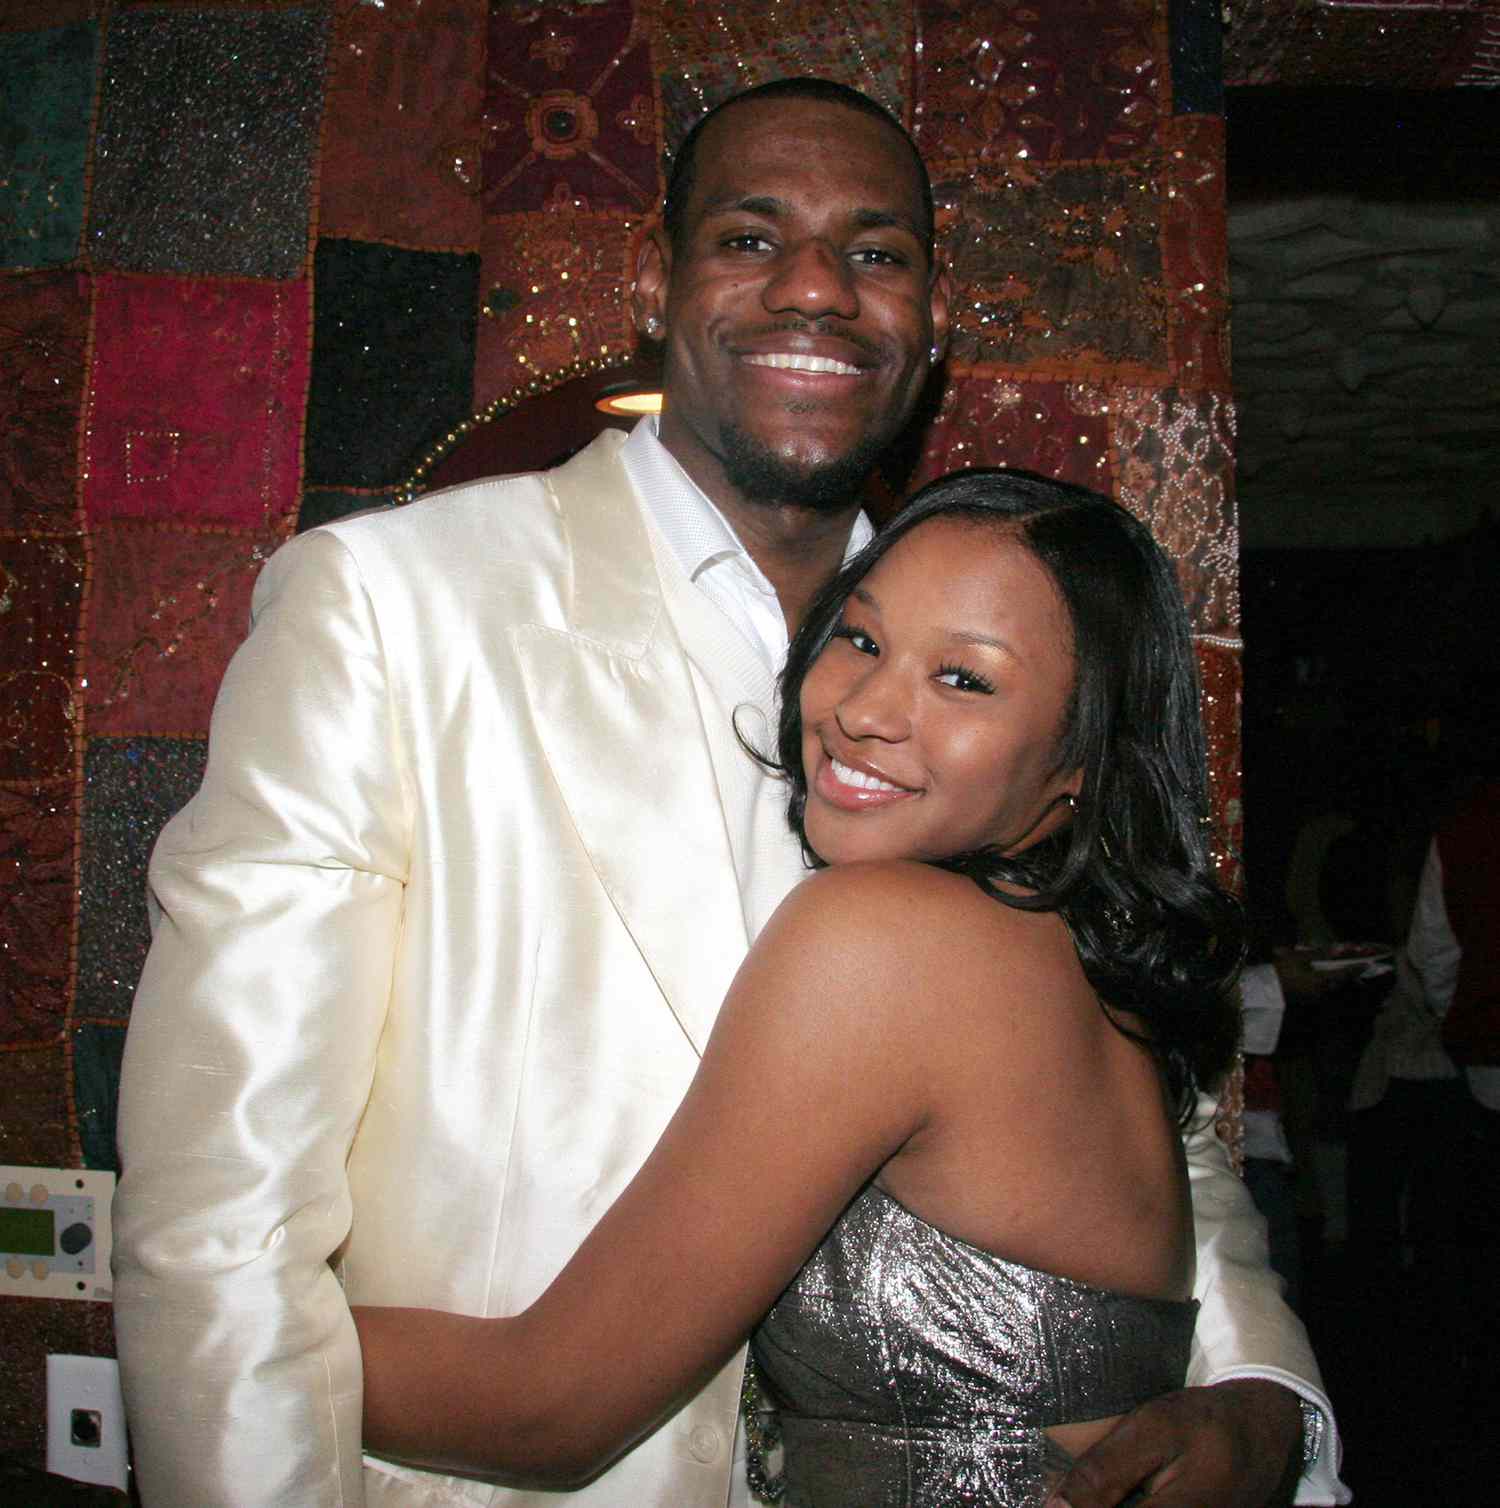 Who Is LeBron James' Wife? All About Savannah James